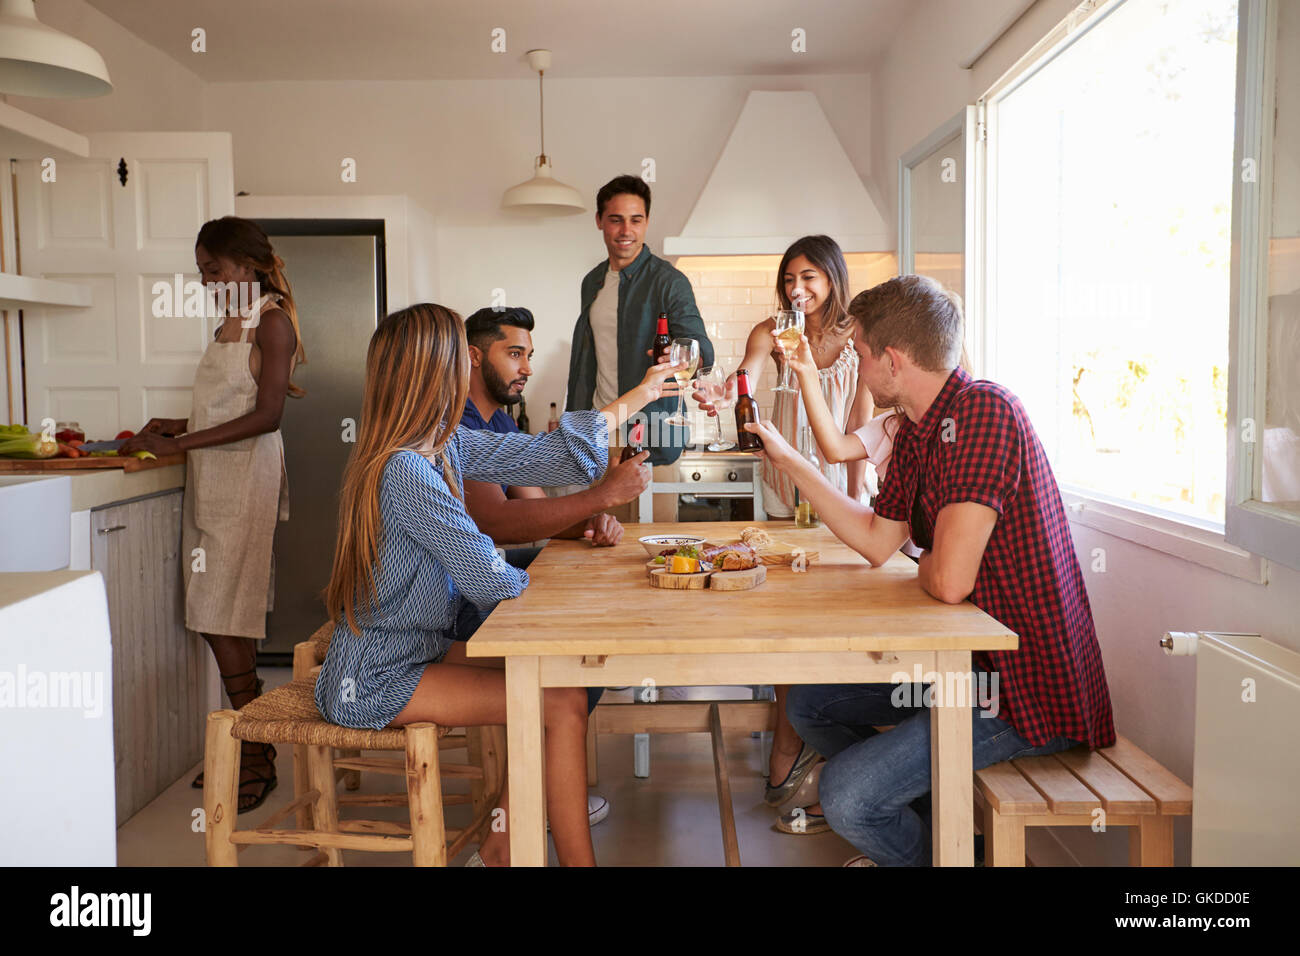 Friends making a toast in kitchen, one preparing food Stock Photo